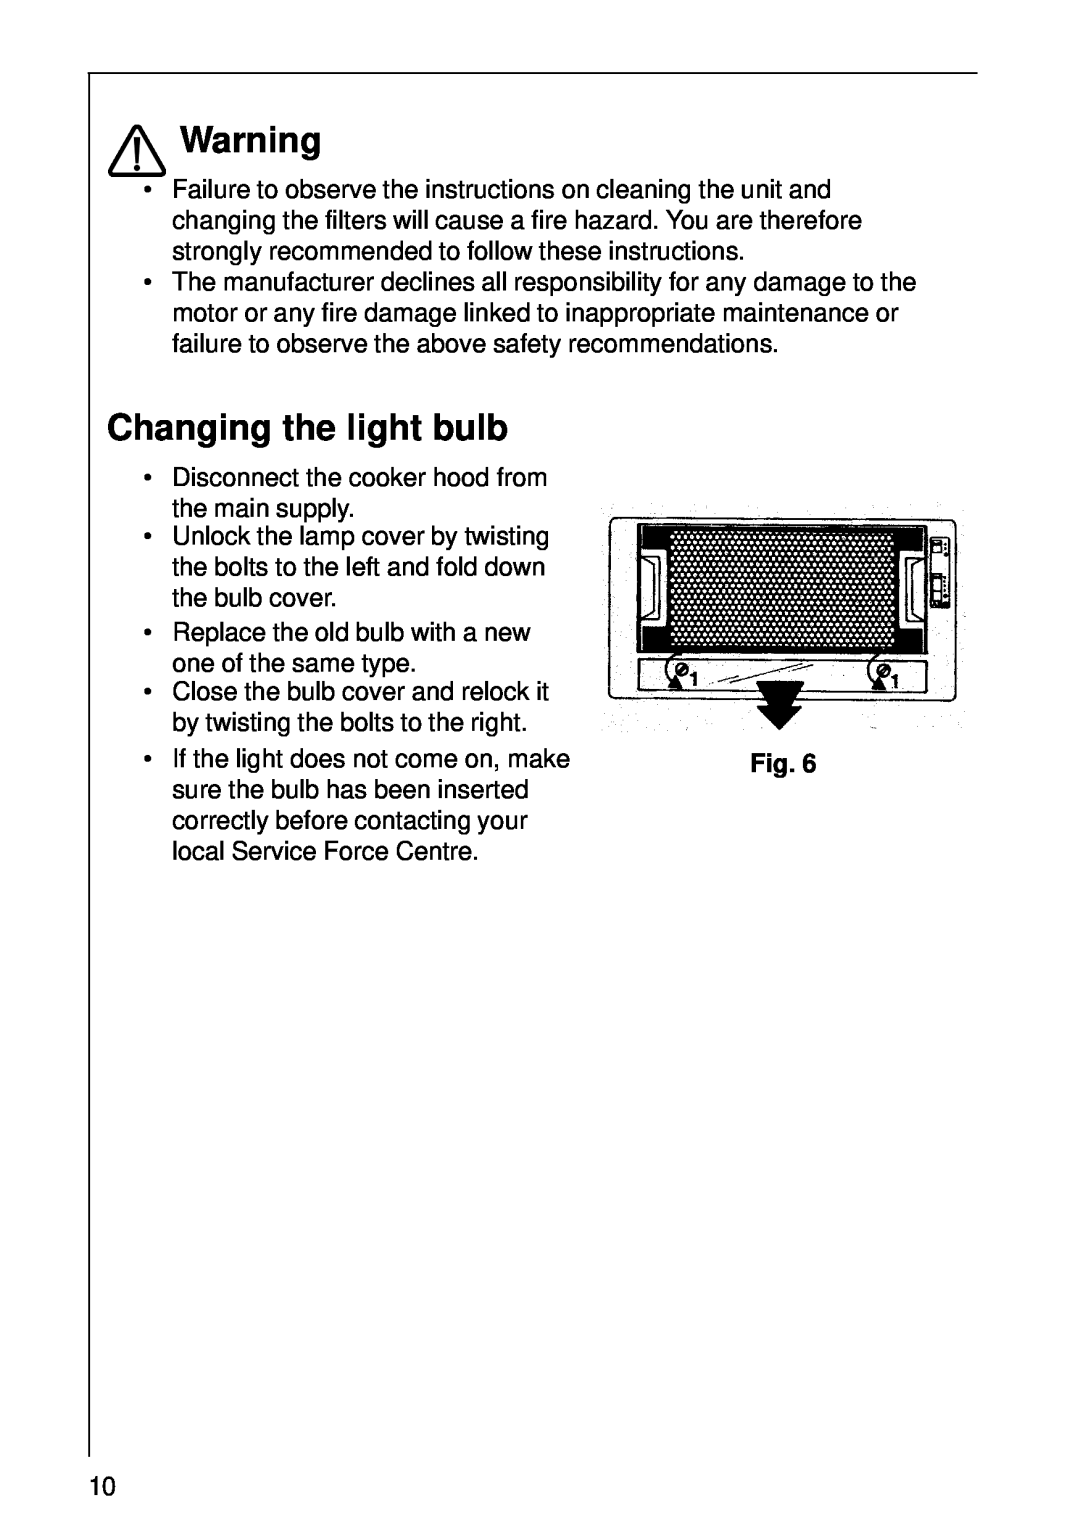 Electrolux 5708 D, CHDL 4150, 570 D, DL 6250 installation instructions Changing the light bulb 